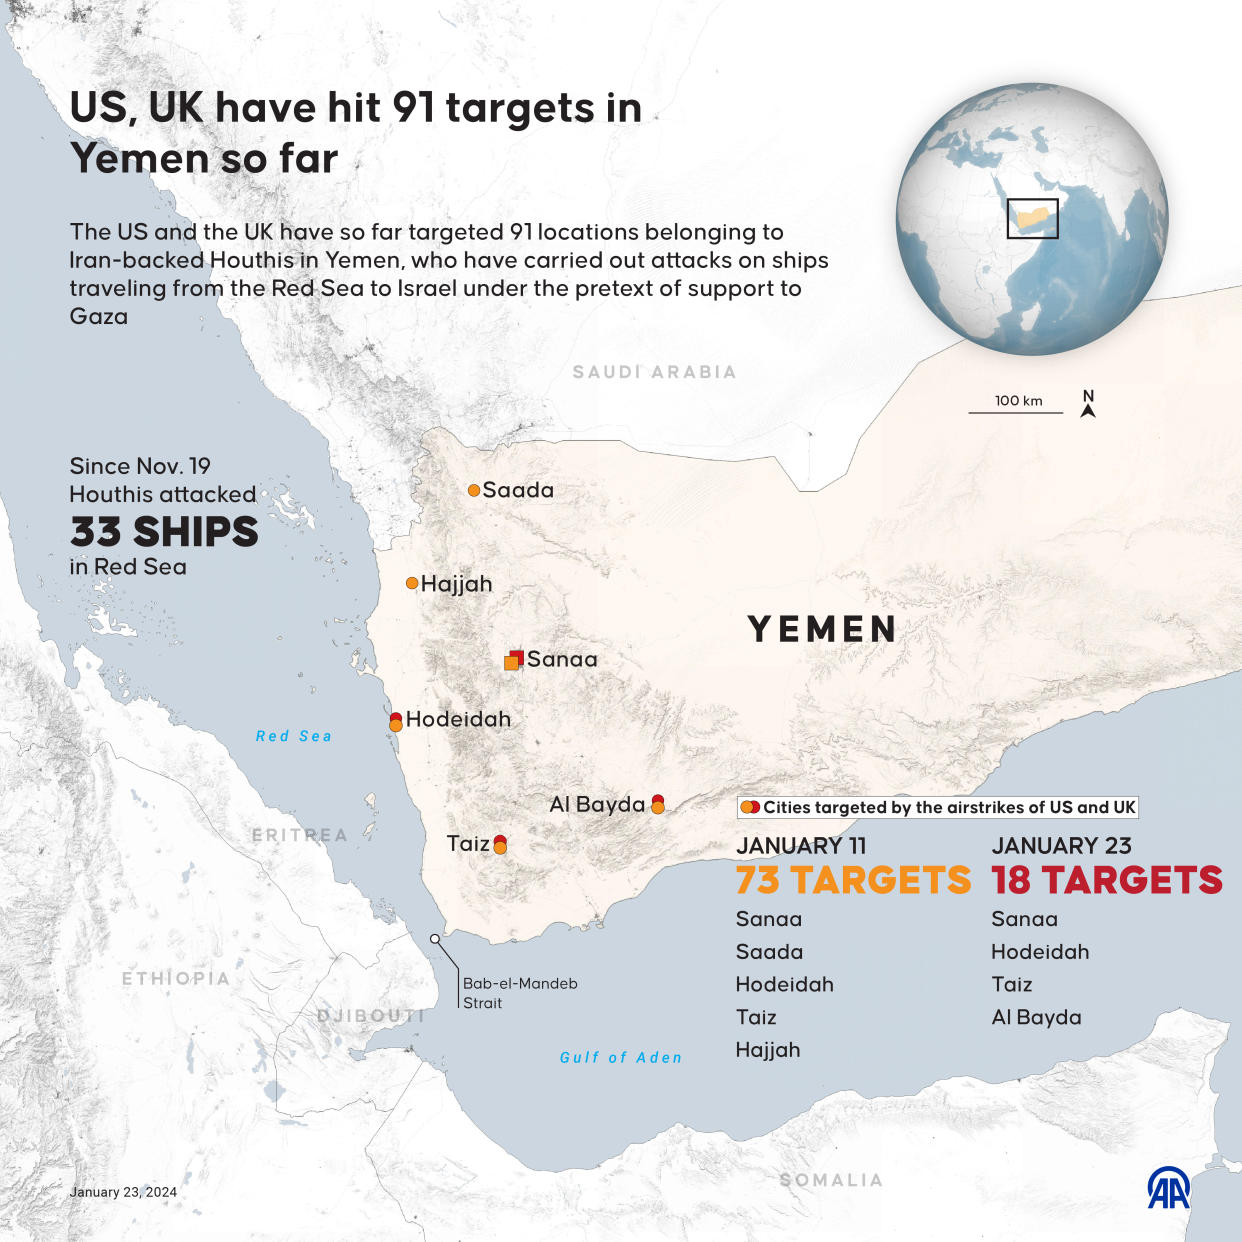 ANKARA, TURKIYE - JANUARY 23: An infographic titled 'US, UK have hit 91 targets in Yemen so far' created in Ankara, Turkiye on January 23, 2024. The US and the UK have so far targeted 91 locations belonging to Iran-backed Houthis in Yemen, who have carried out attacks on ships traveling from the Red Sea to Israel under the pretext of support to Gaza. (Photo by Yasin Demirci/Anadolu via Getty Images)